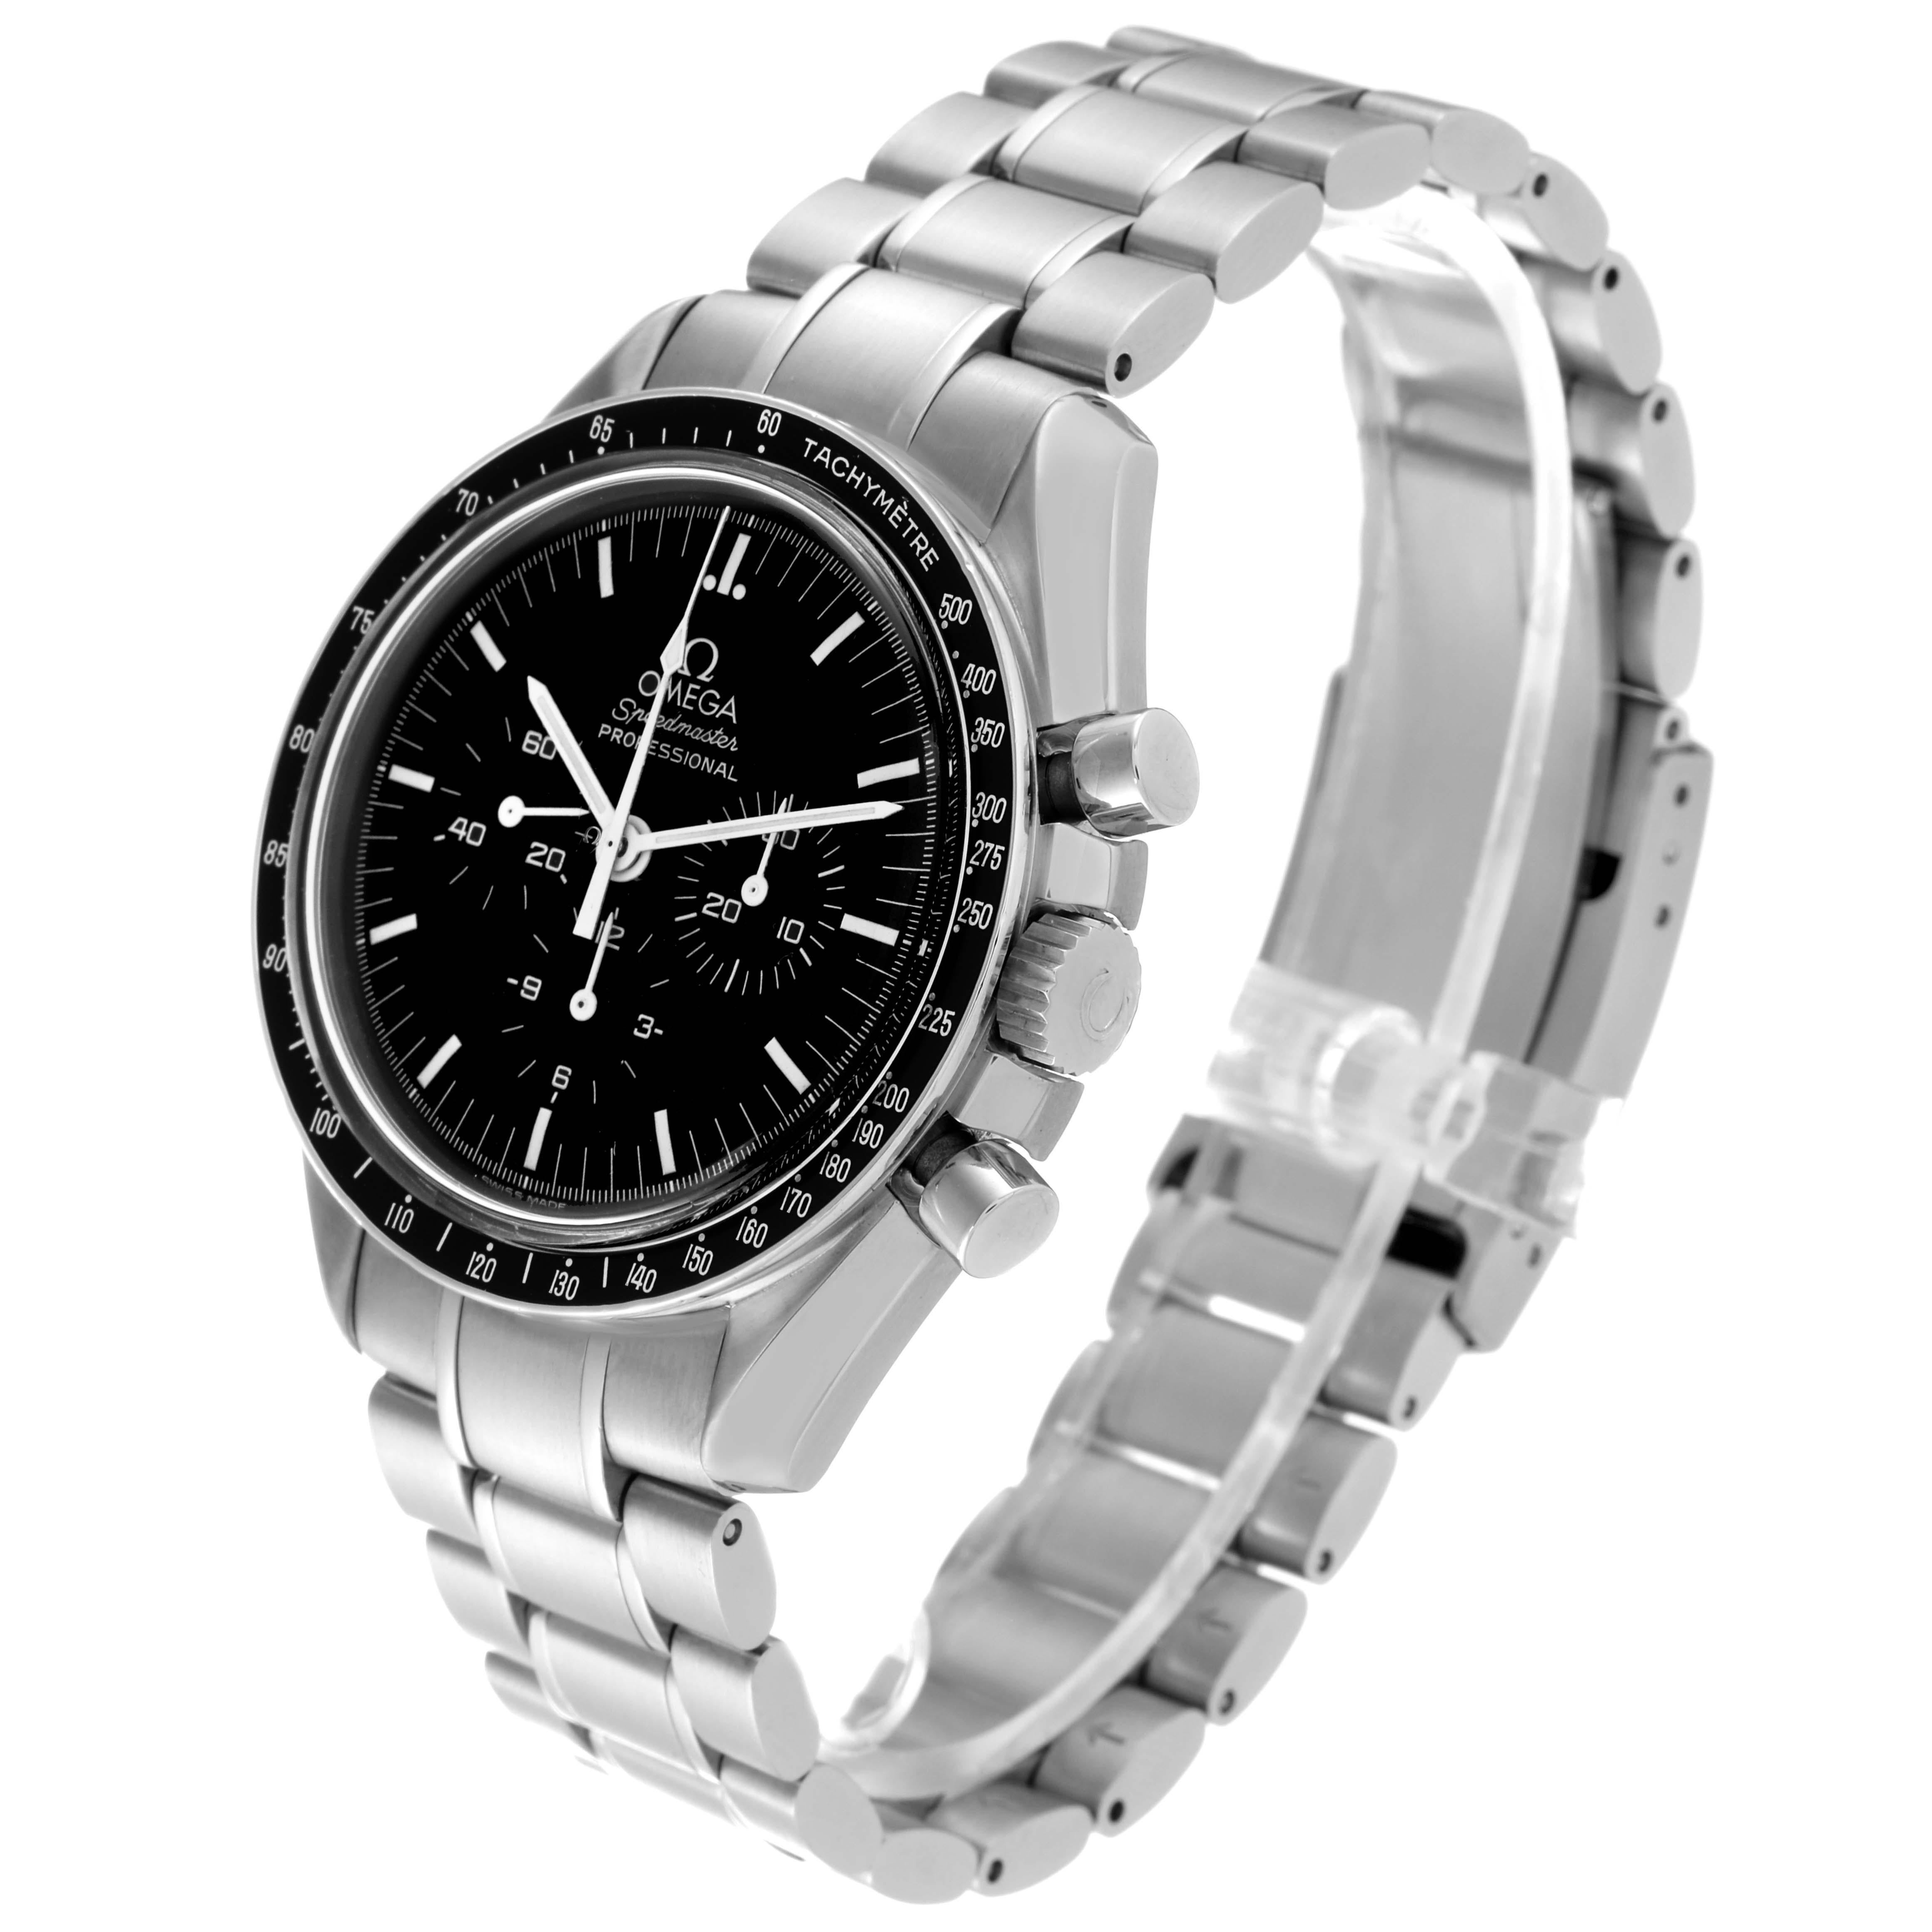 Omega Speedmaster Apollo XVII Limited Edition Mens Watch 3574.51.00 Box Card For Sale 3